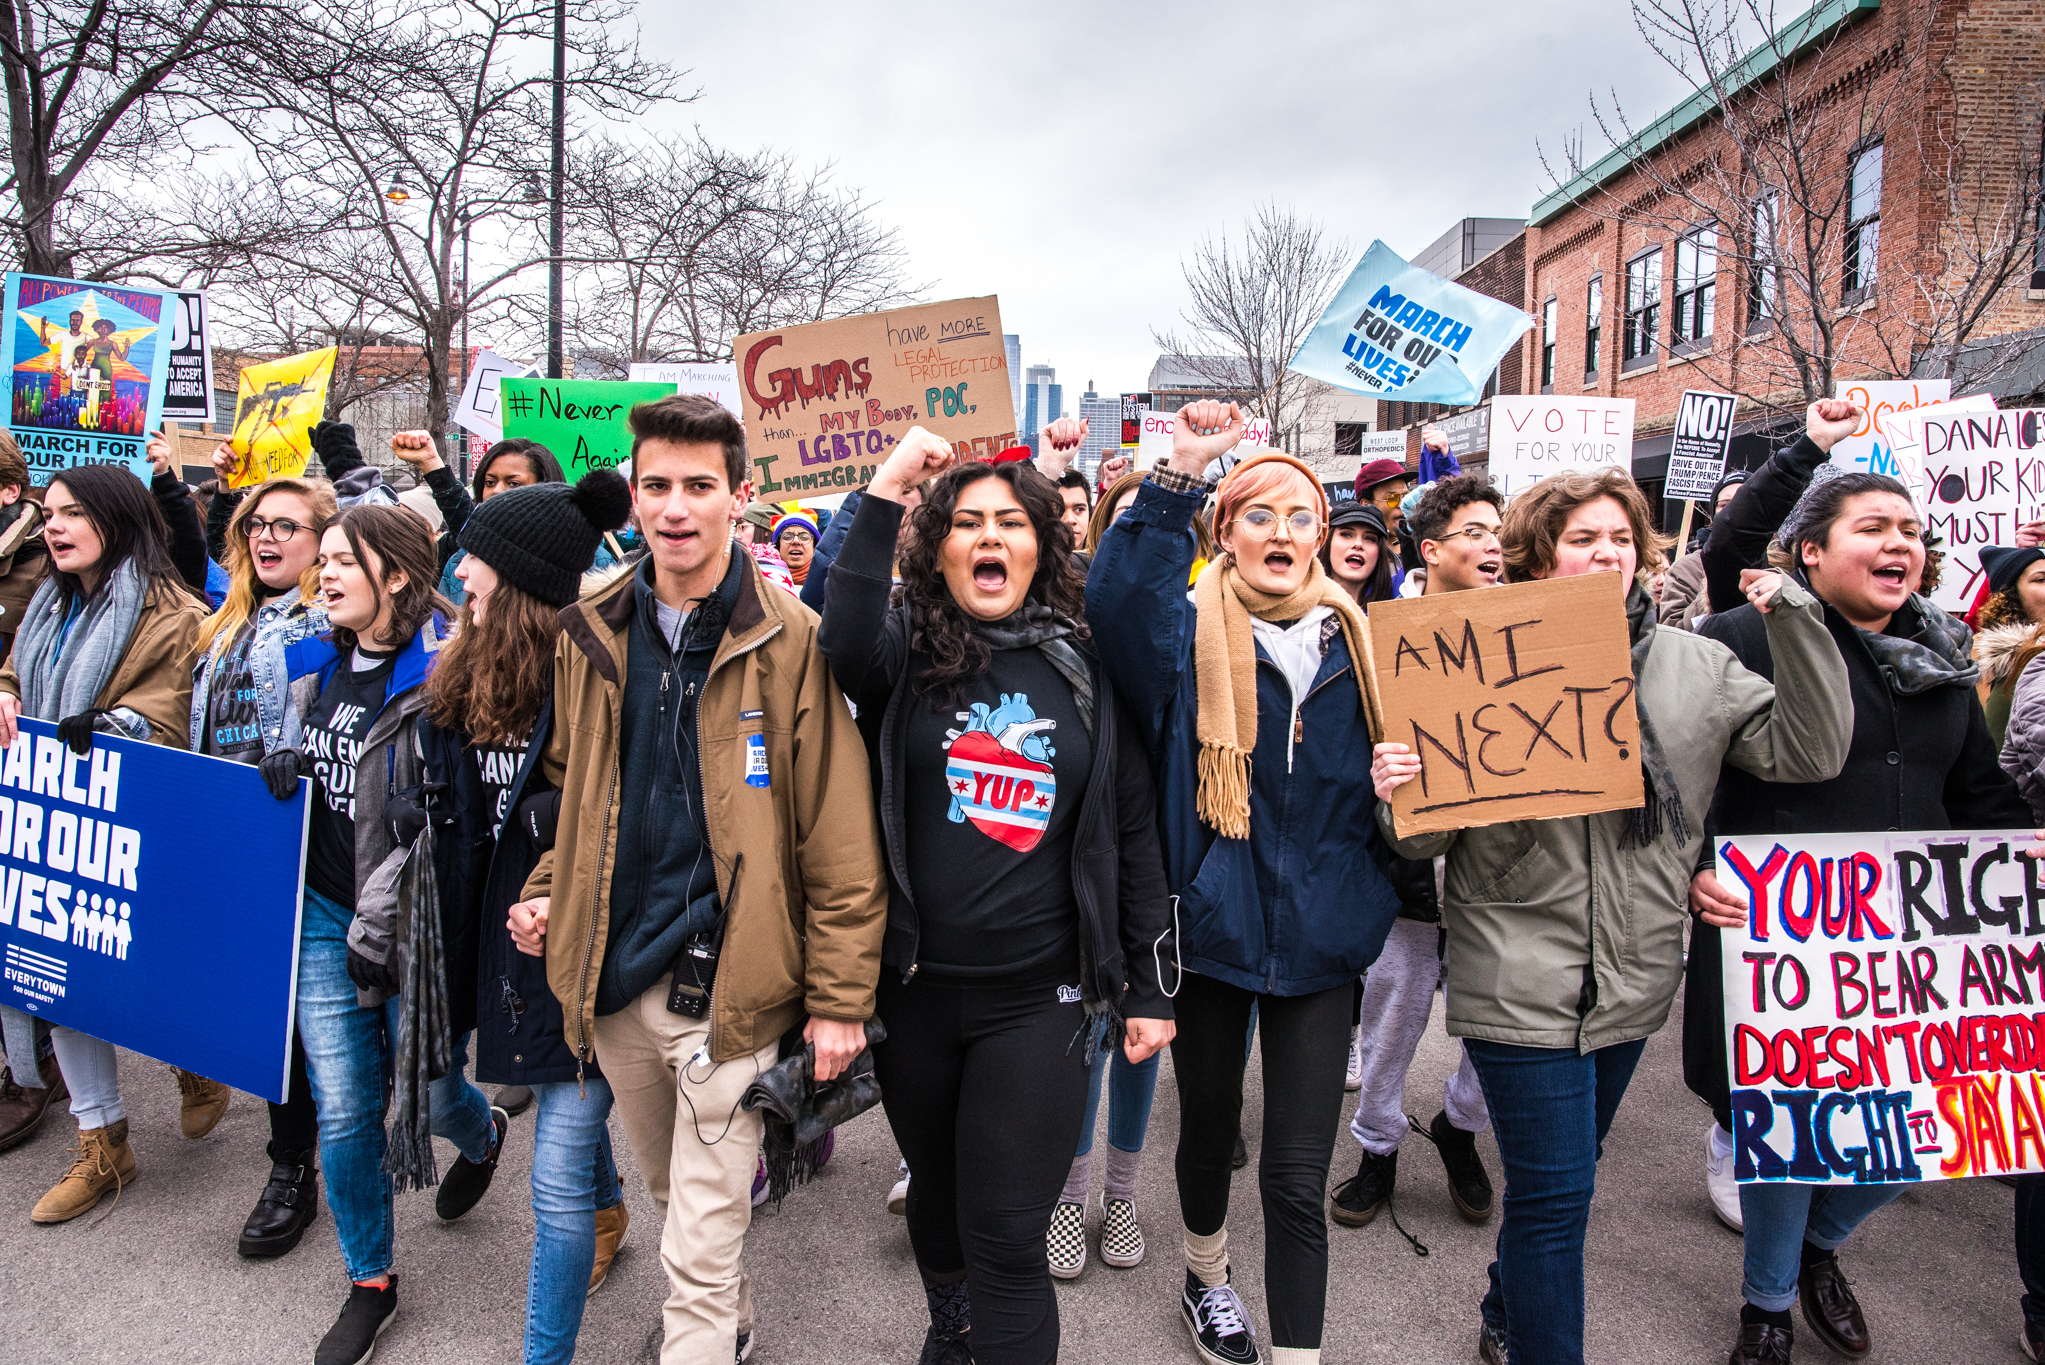 Photos from the Chicago March for Our Lives rally in Union Park